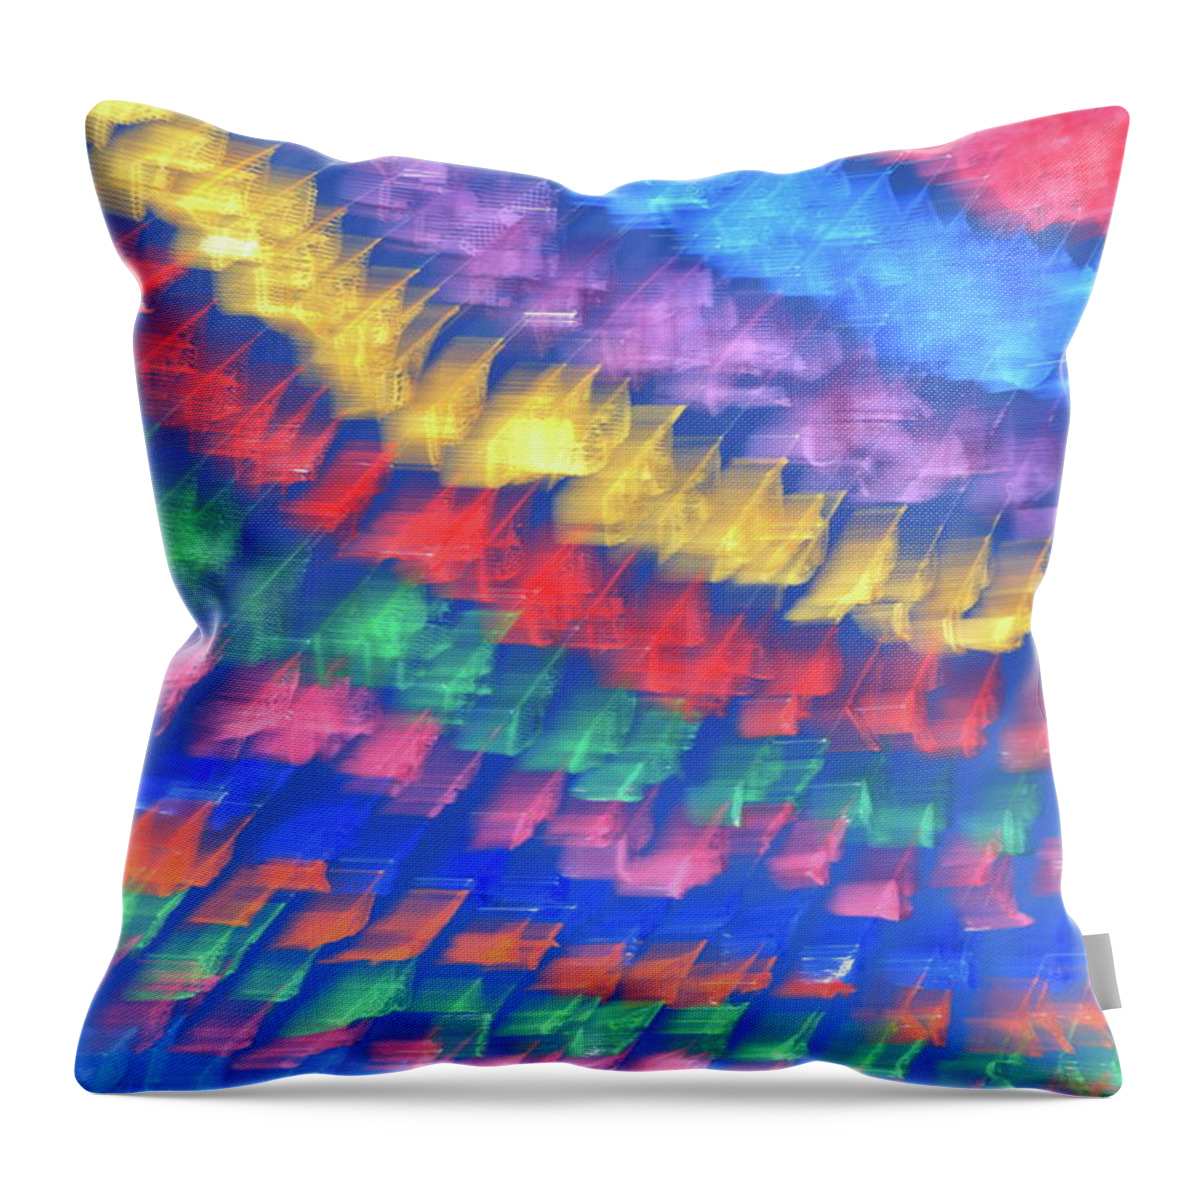  Fiesta Colors Throw Pillow featuring the photograph Fiesta Colors by Roupen Baker